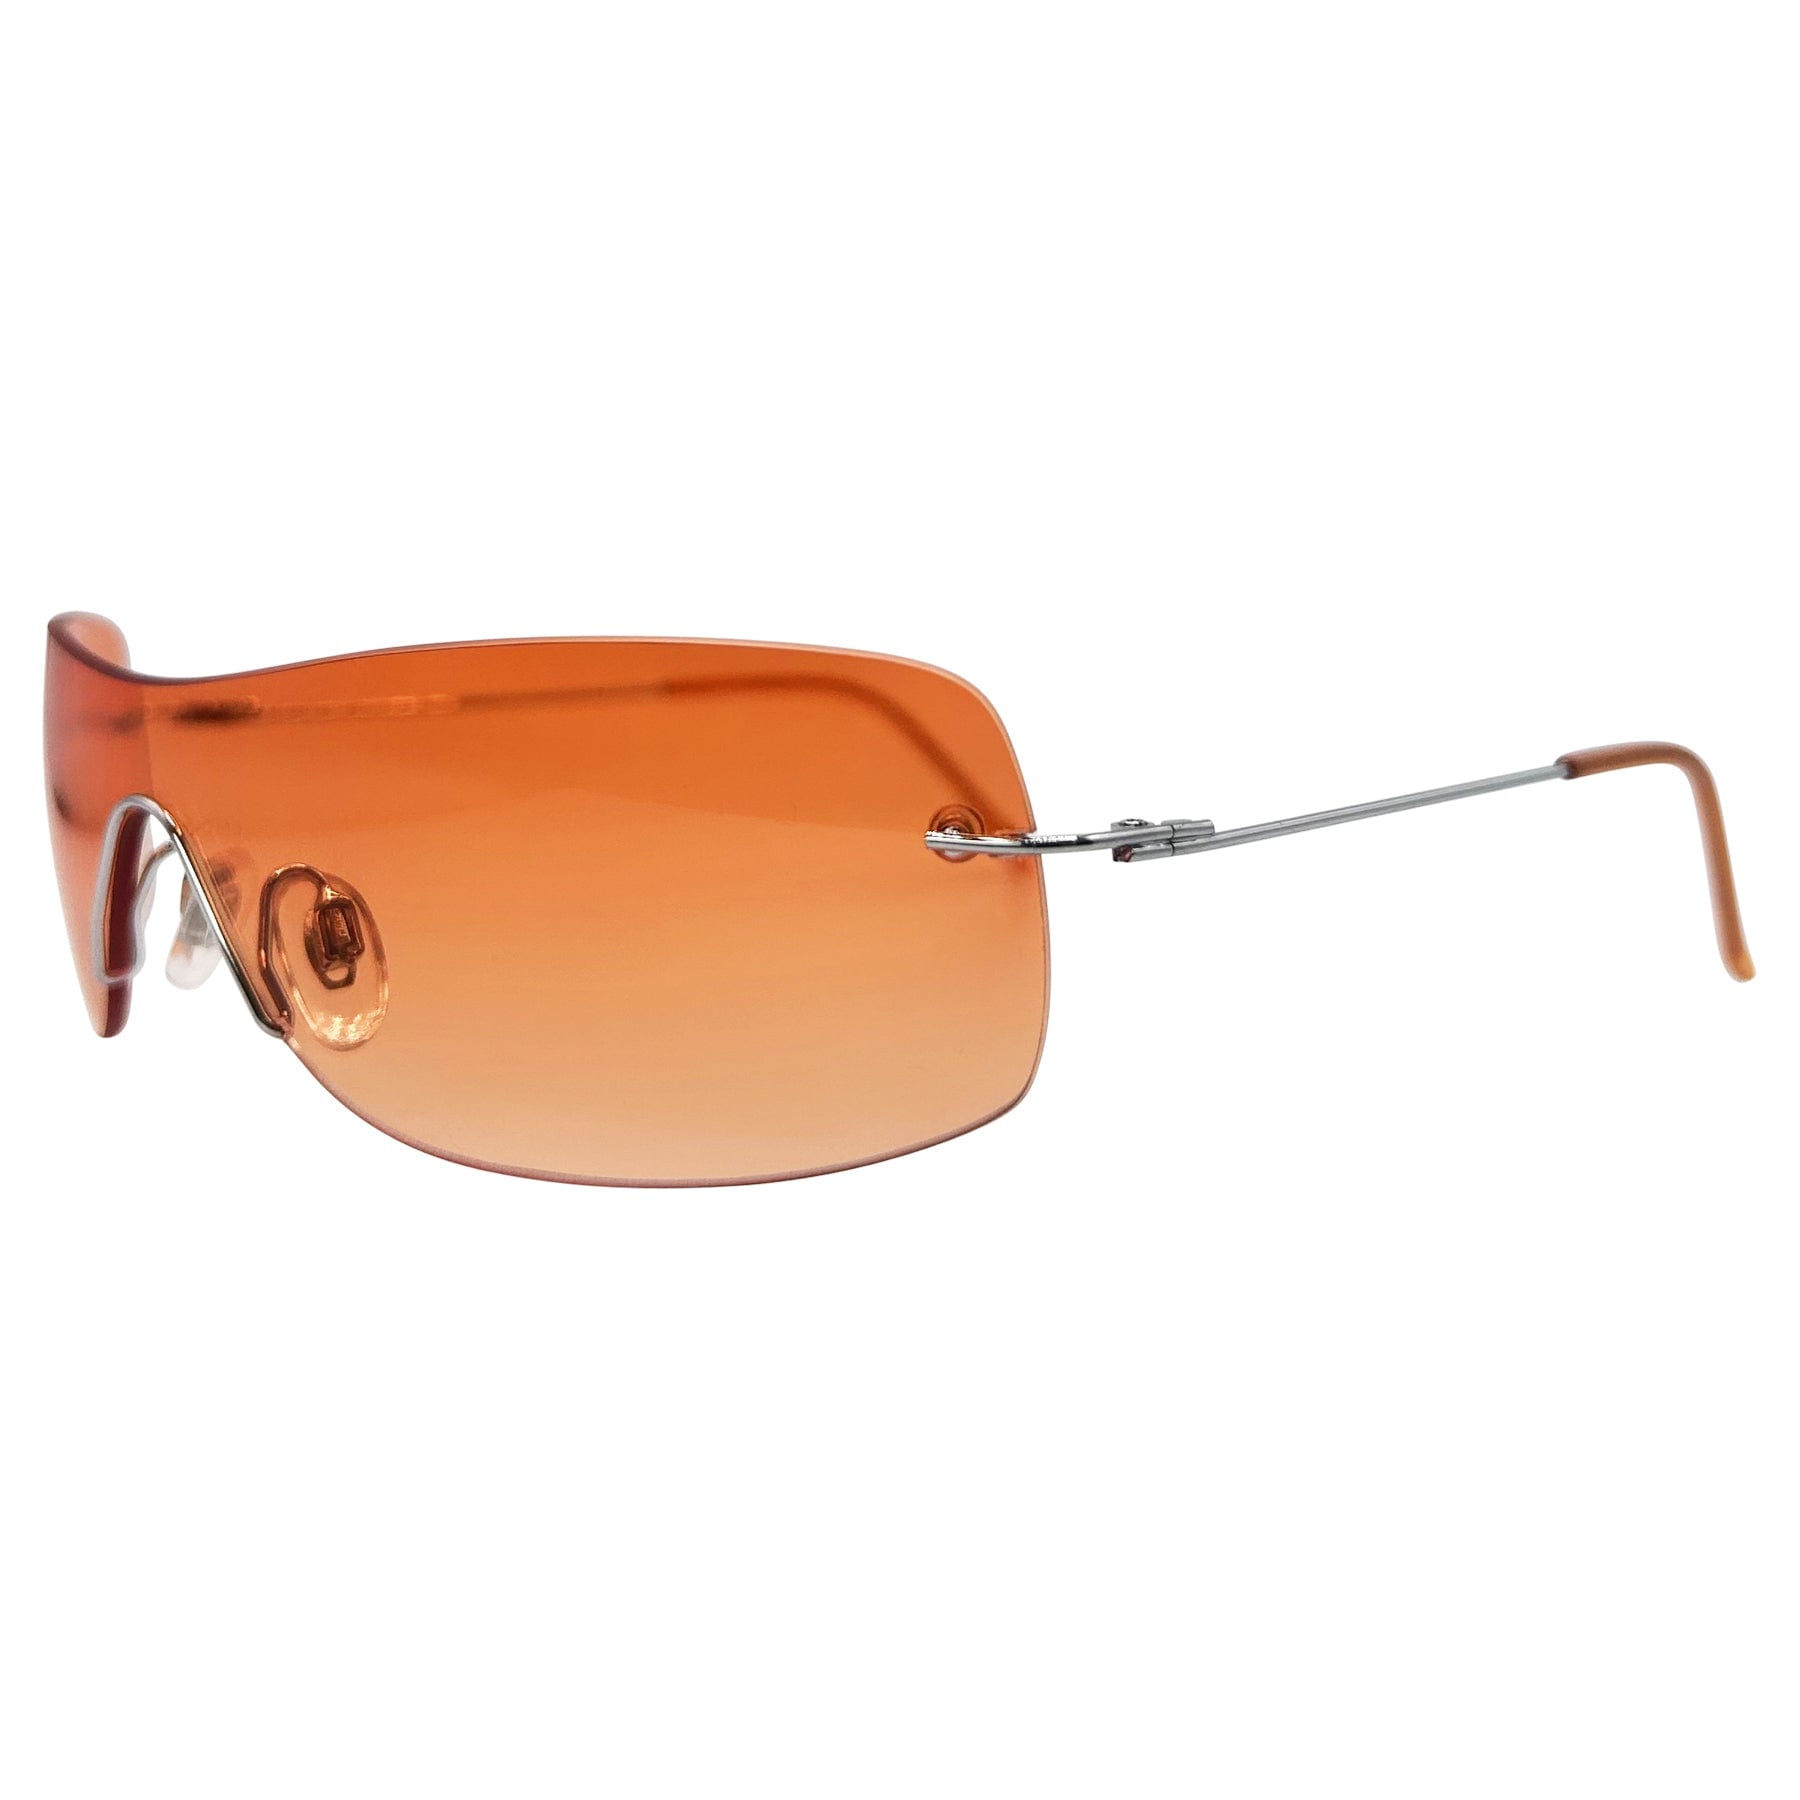 y2k rimless style rave sunglasses with a orange lens 